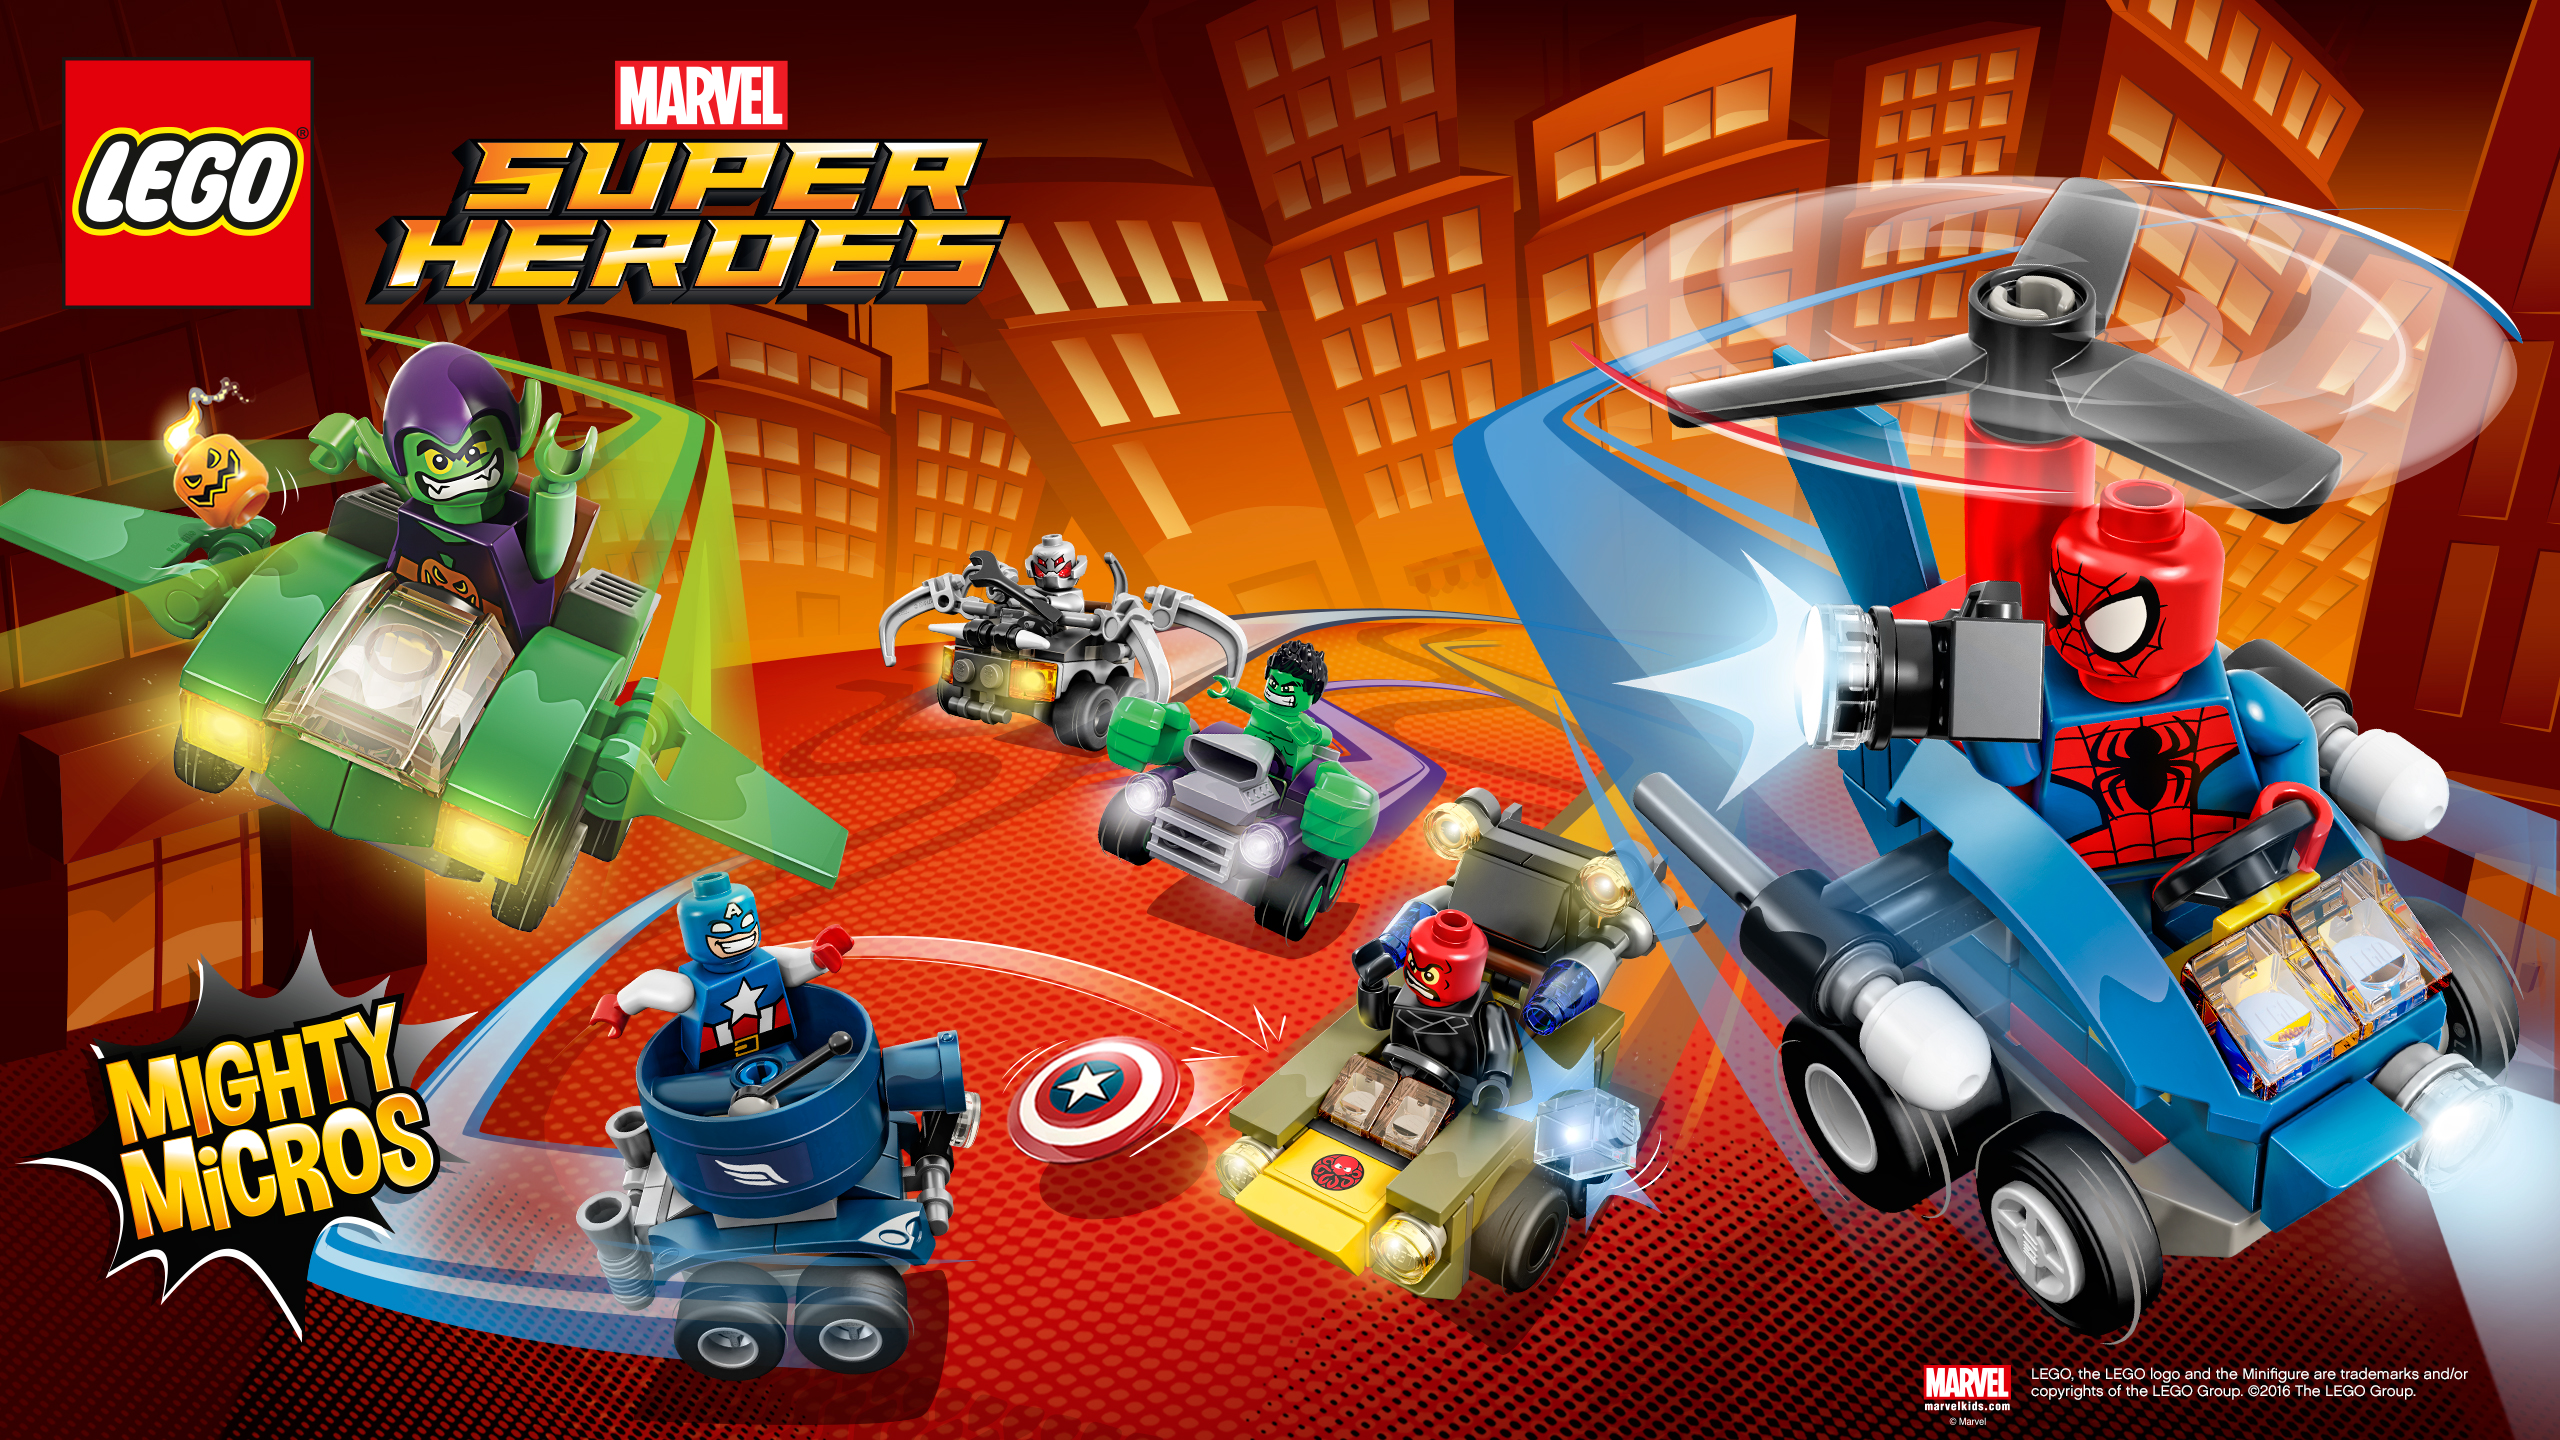 Marvel Mighty Micros   Wallpapers   LEGO Marvel Super Heroes